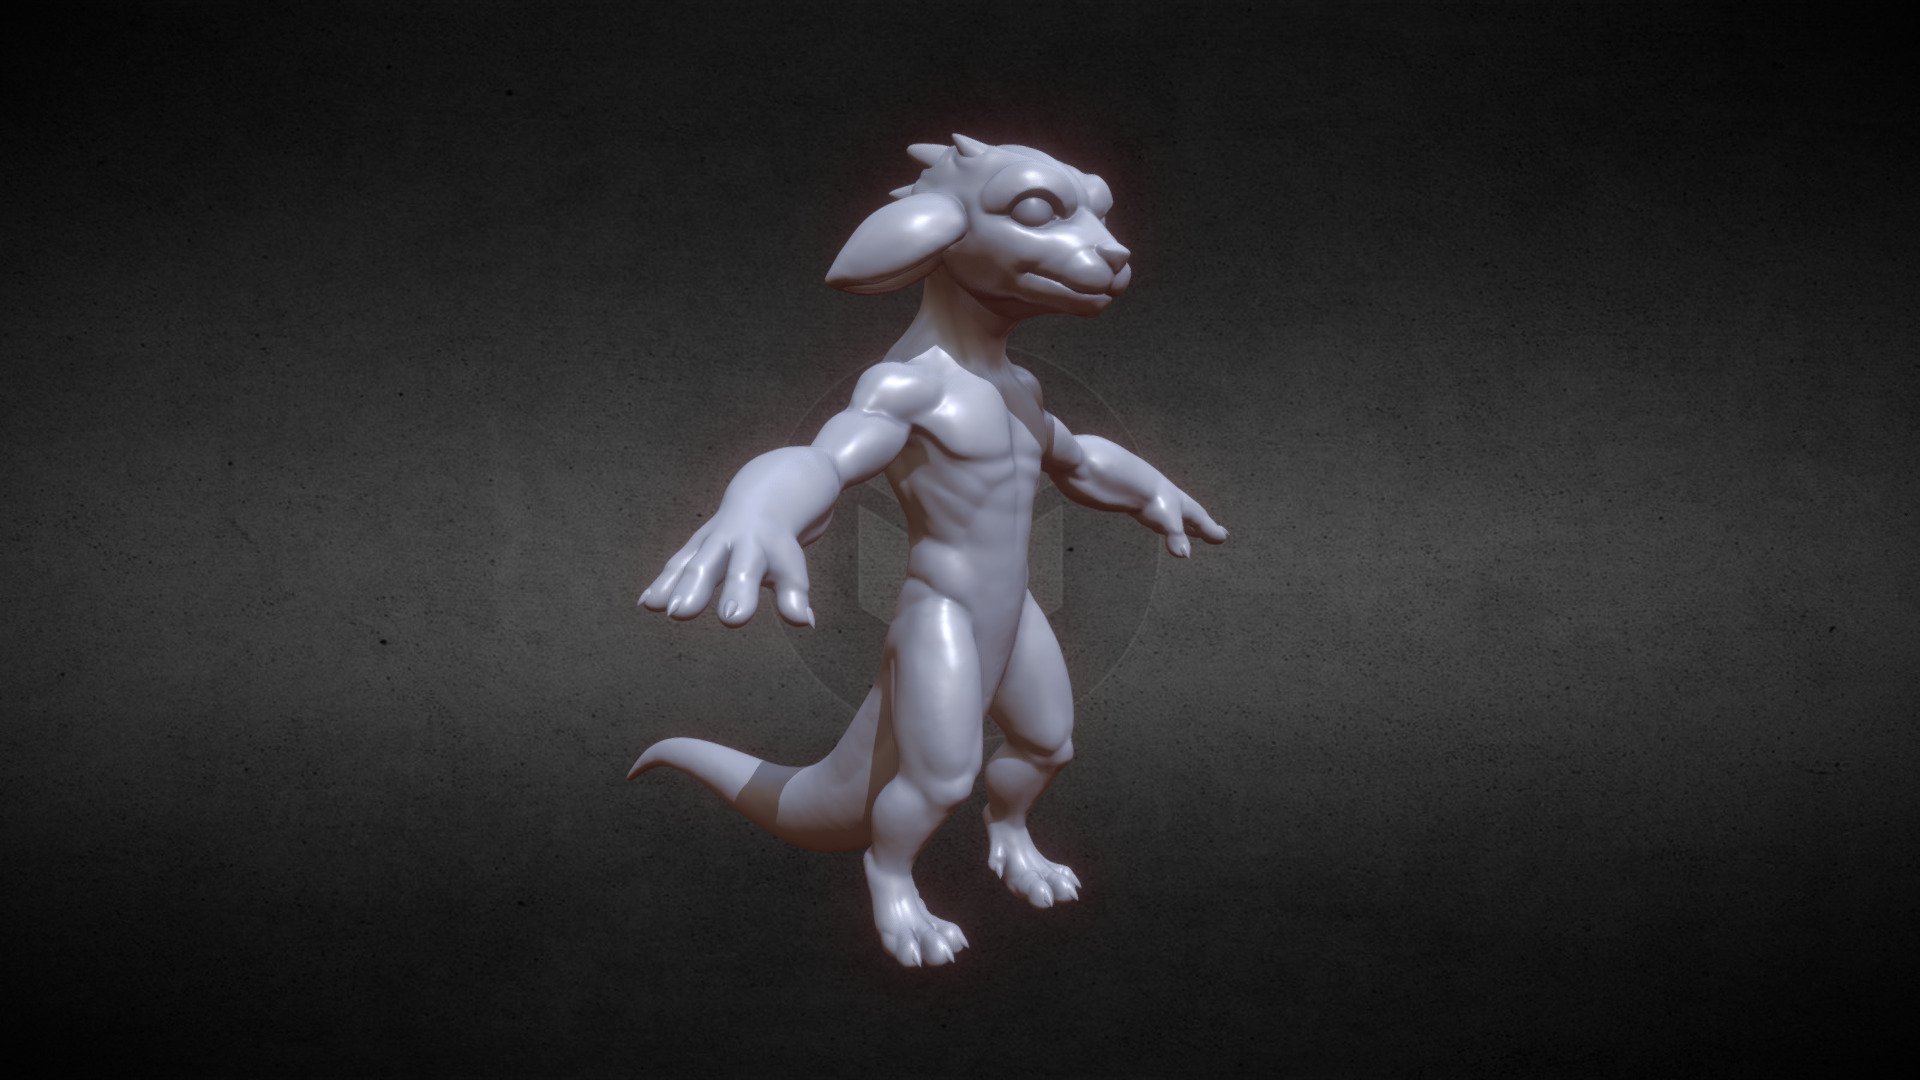 A new kobold sculpt based on a redesign of kobolds I did a while back. Trying to steer away from the raptor-like look of my last model and go for a more dog-like face. I feel the torso still looks too human, but he'll have a more animalistic stance if I ever get this model rigged.

This particular kobold is named Bo, hopefully we'll be seeing more of him in the future. I plan to retopologize him in Maya, then do a detail pass in ZBrush to add in scales and wrinkles and such.

This was sculpted in Sculptris 3d model